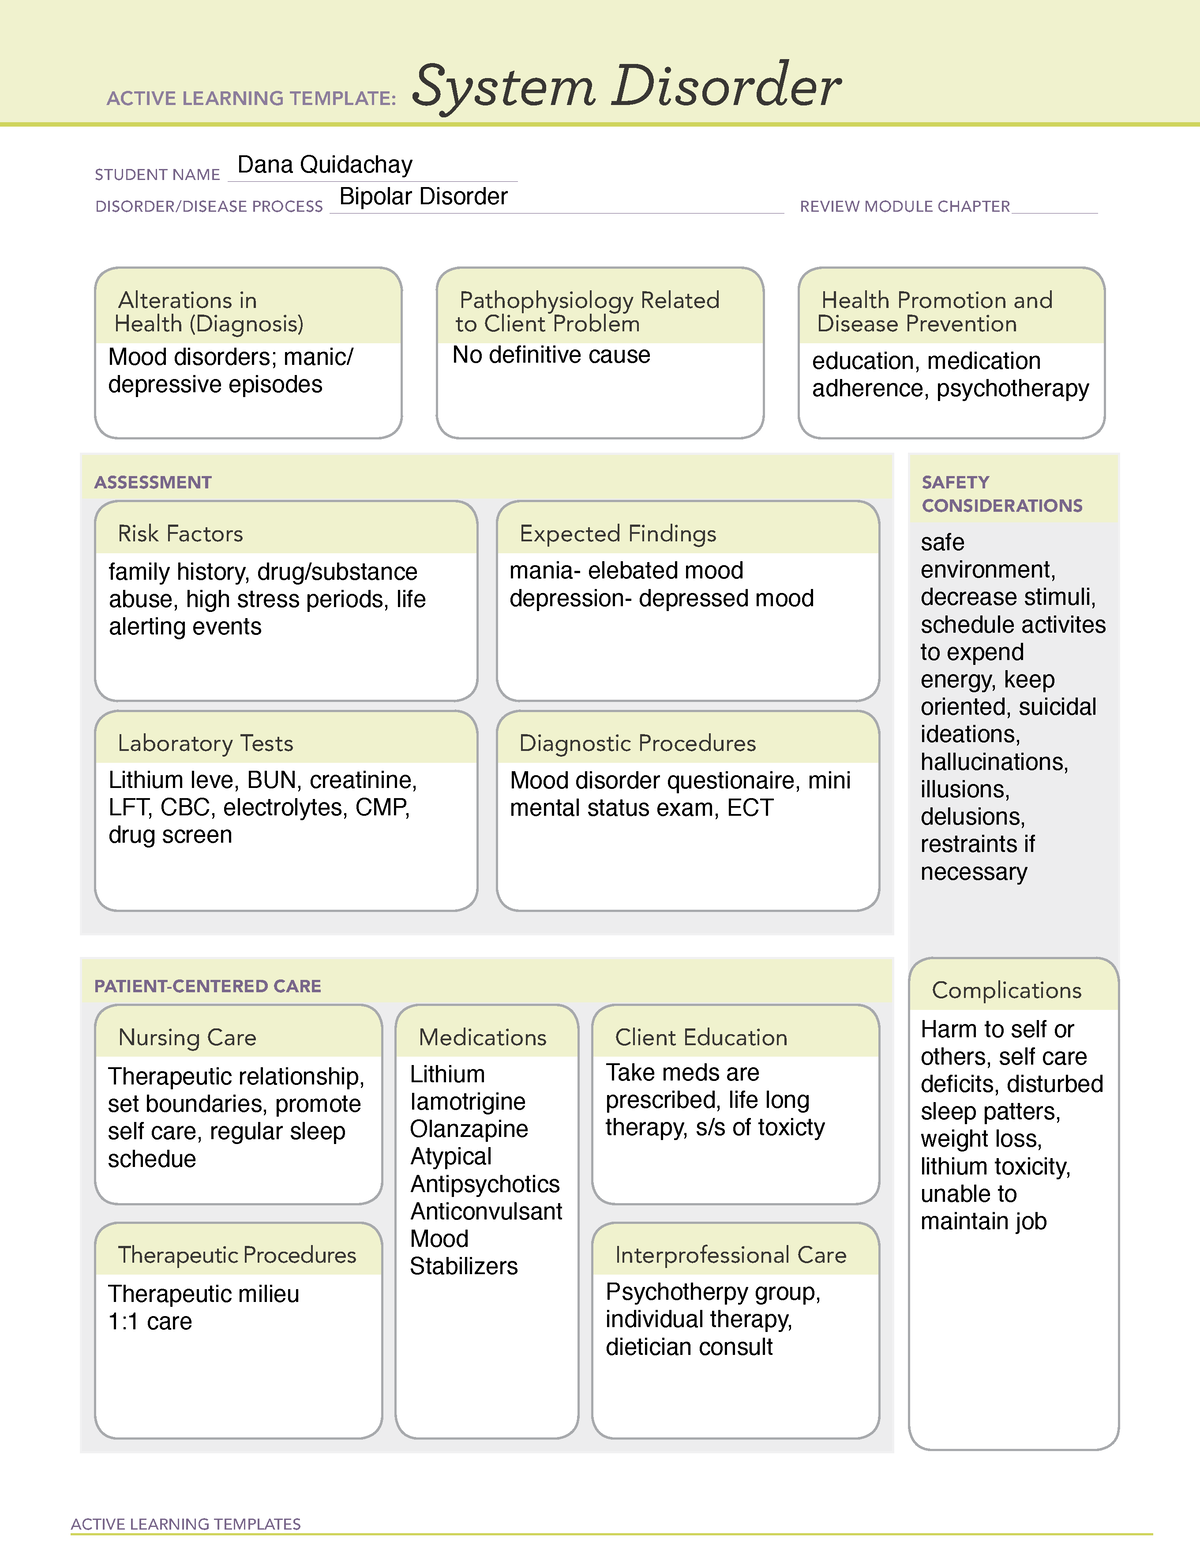 System DisorderBipolar Disorder Template ACTIVE LEARNING TEMPLATES